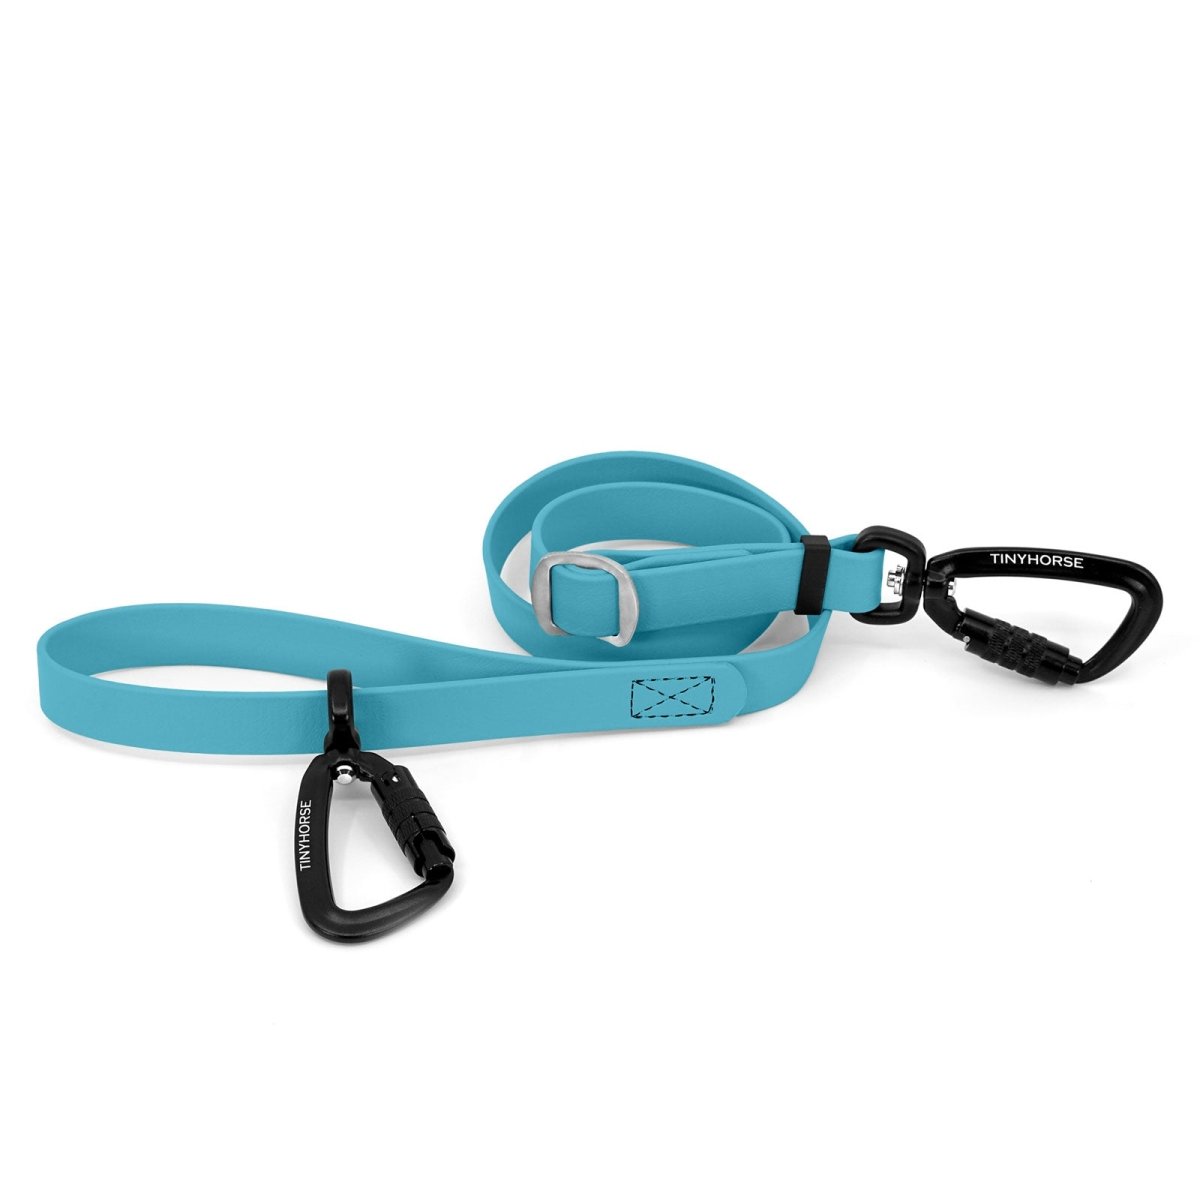 An adjustable baby blue-coloured Lead-All Pro made of BioThane with 2 auto-locking carabiners